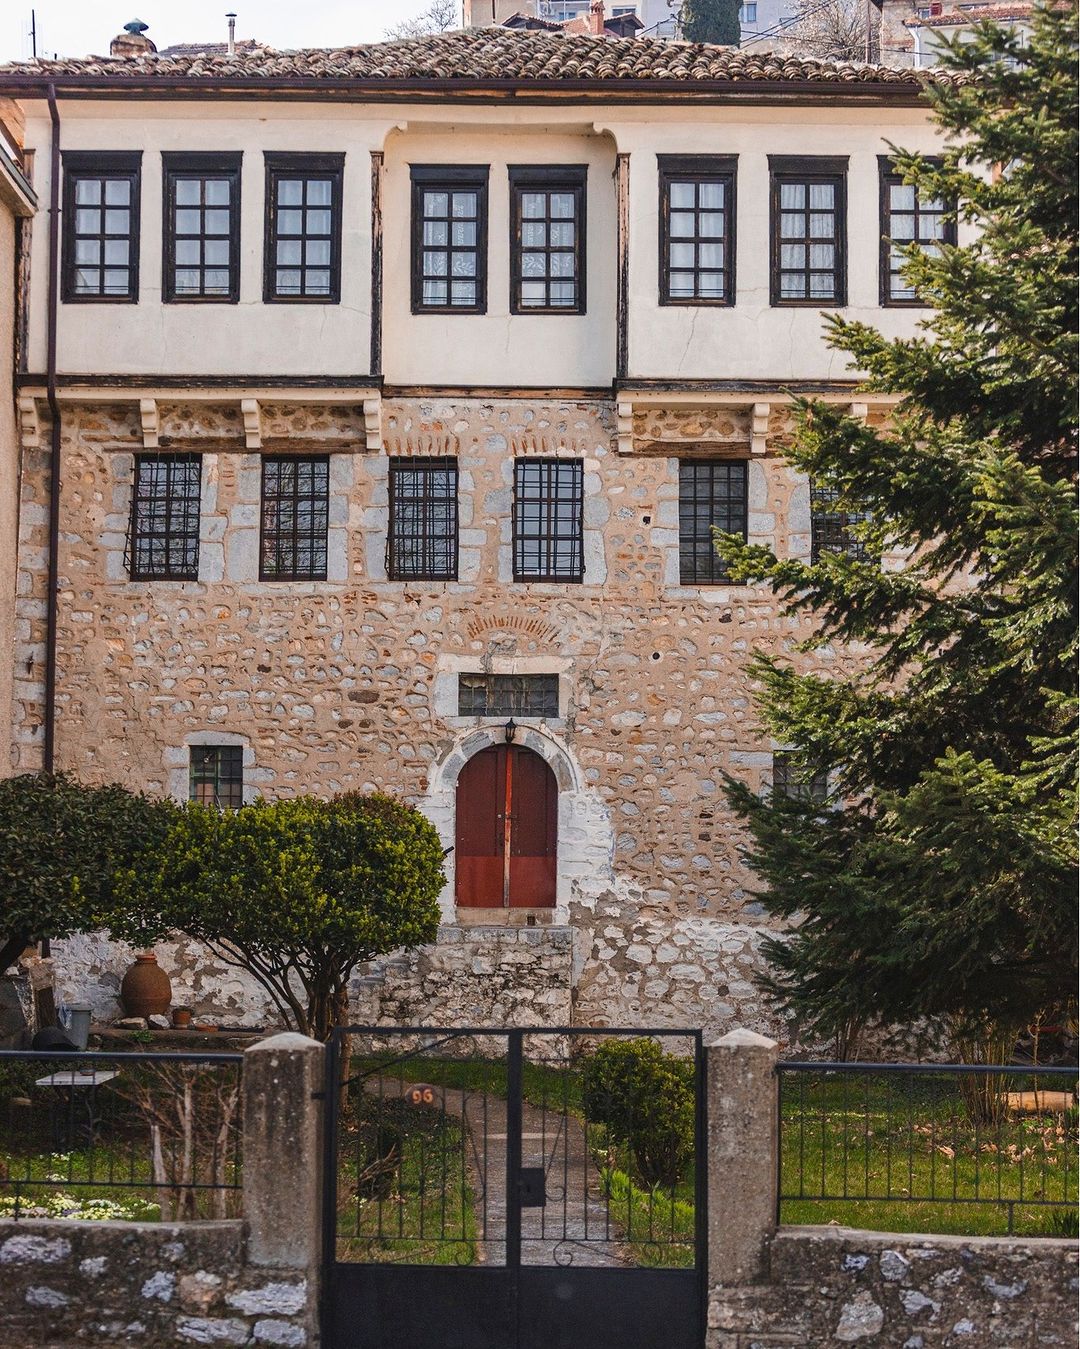 As one of Greece’s oldest cities, Kastoria is full of fascinating structures fro…